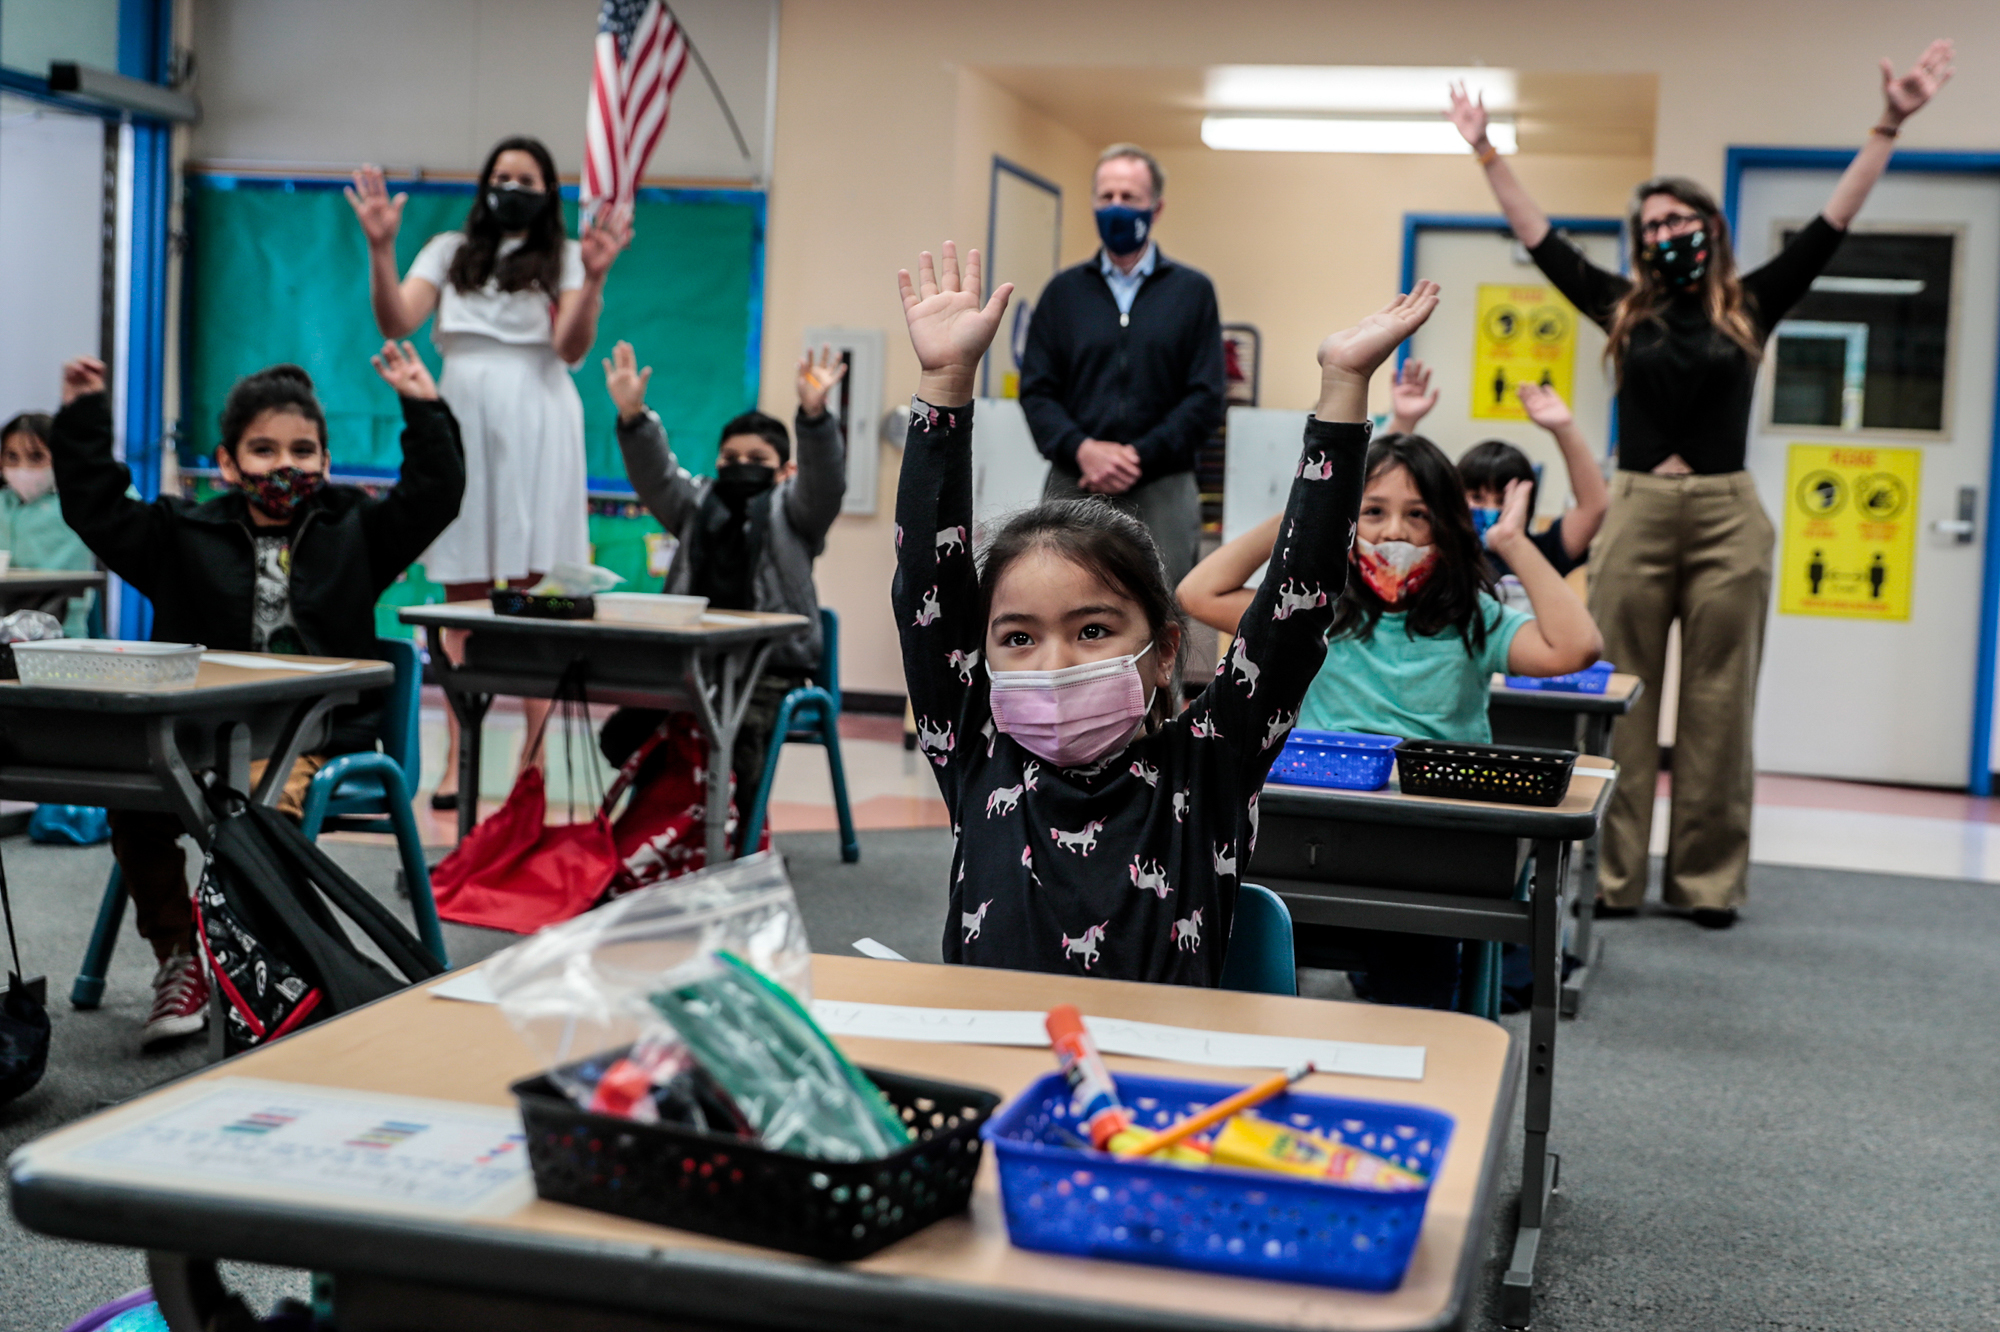 Children in a classroom with face masks put their hands in the air.